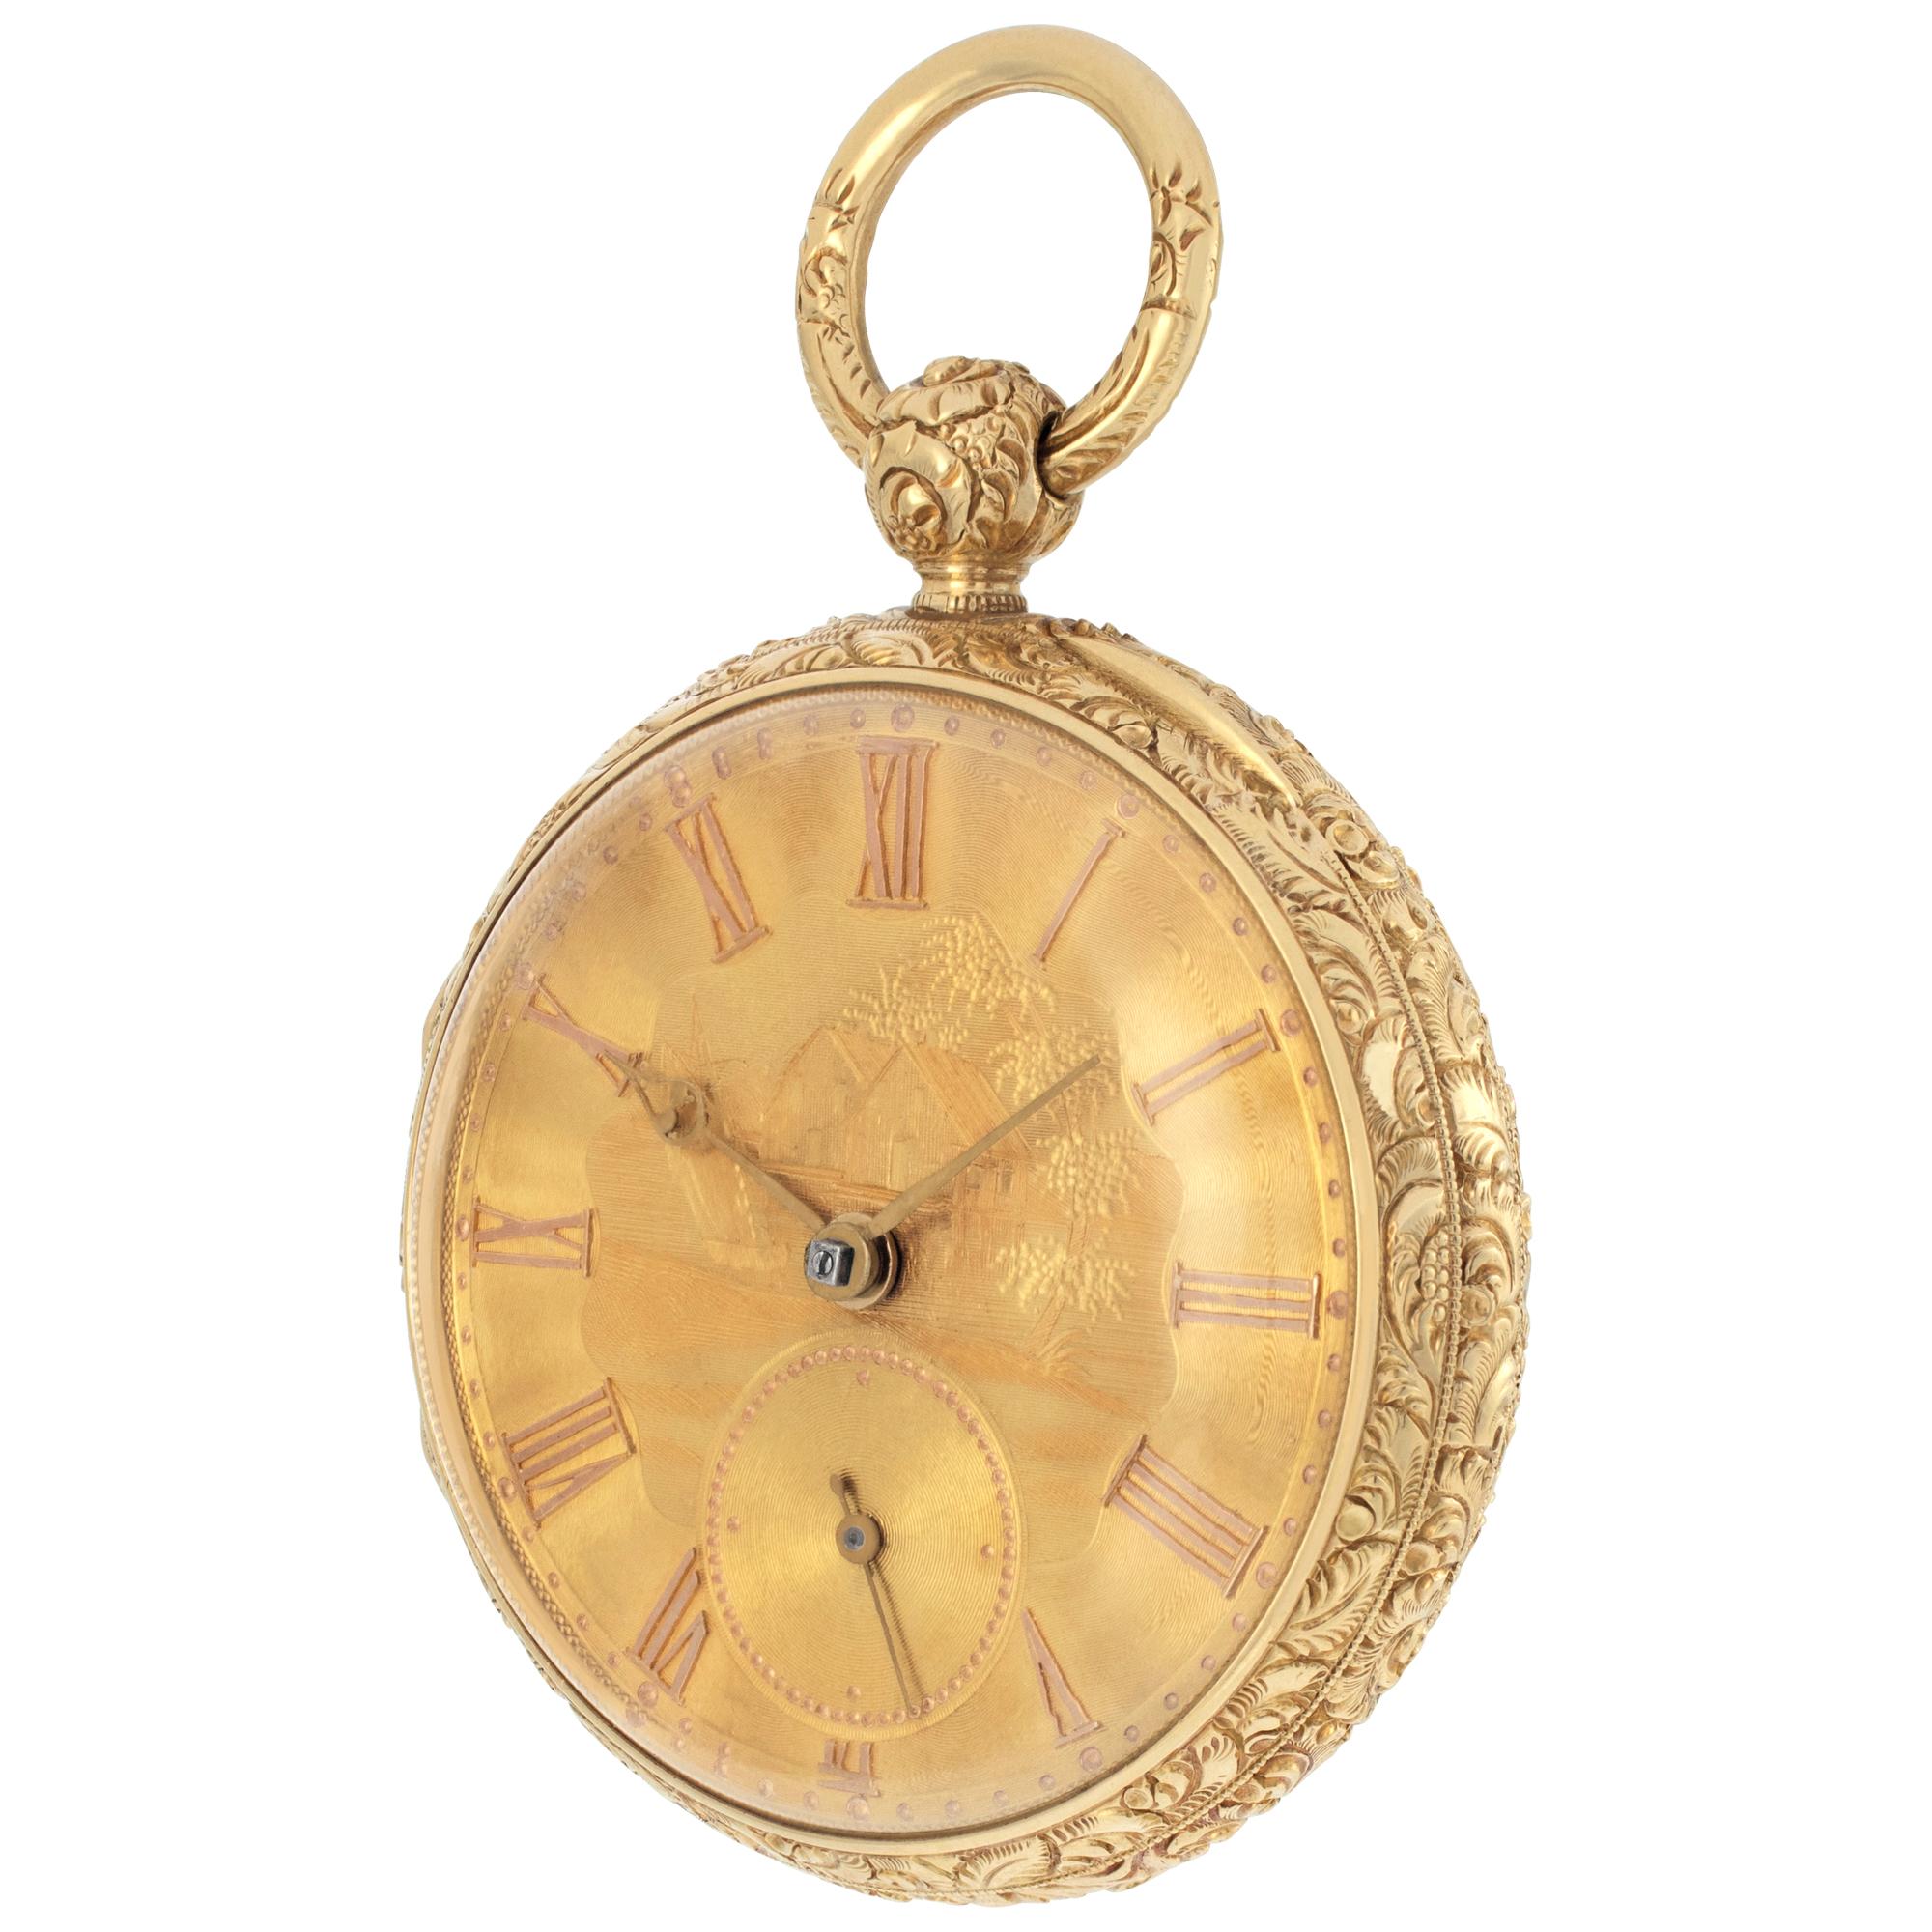 WM Robinson English lever pocket watch in 18k yellow gold. Finely engraved case and gold dial. Key wind. 46mm case size. Circa 1820's. Fine Pre-owned W.M. Robinson Watch. Certified preowned Vintage W.M. Robinson pocket watch watch is made out of